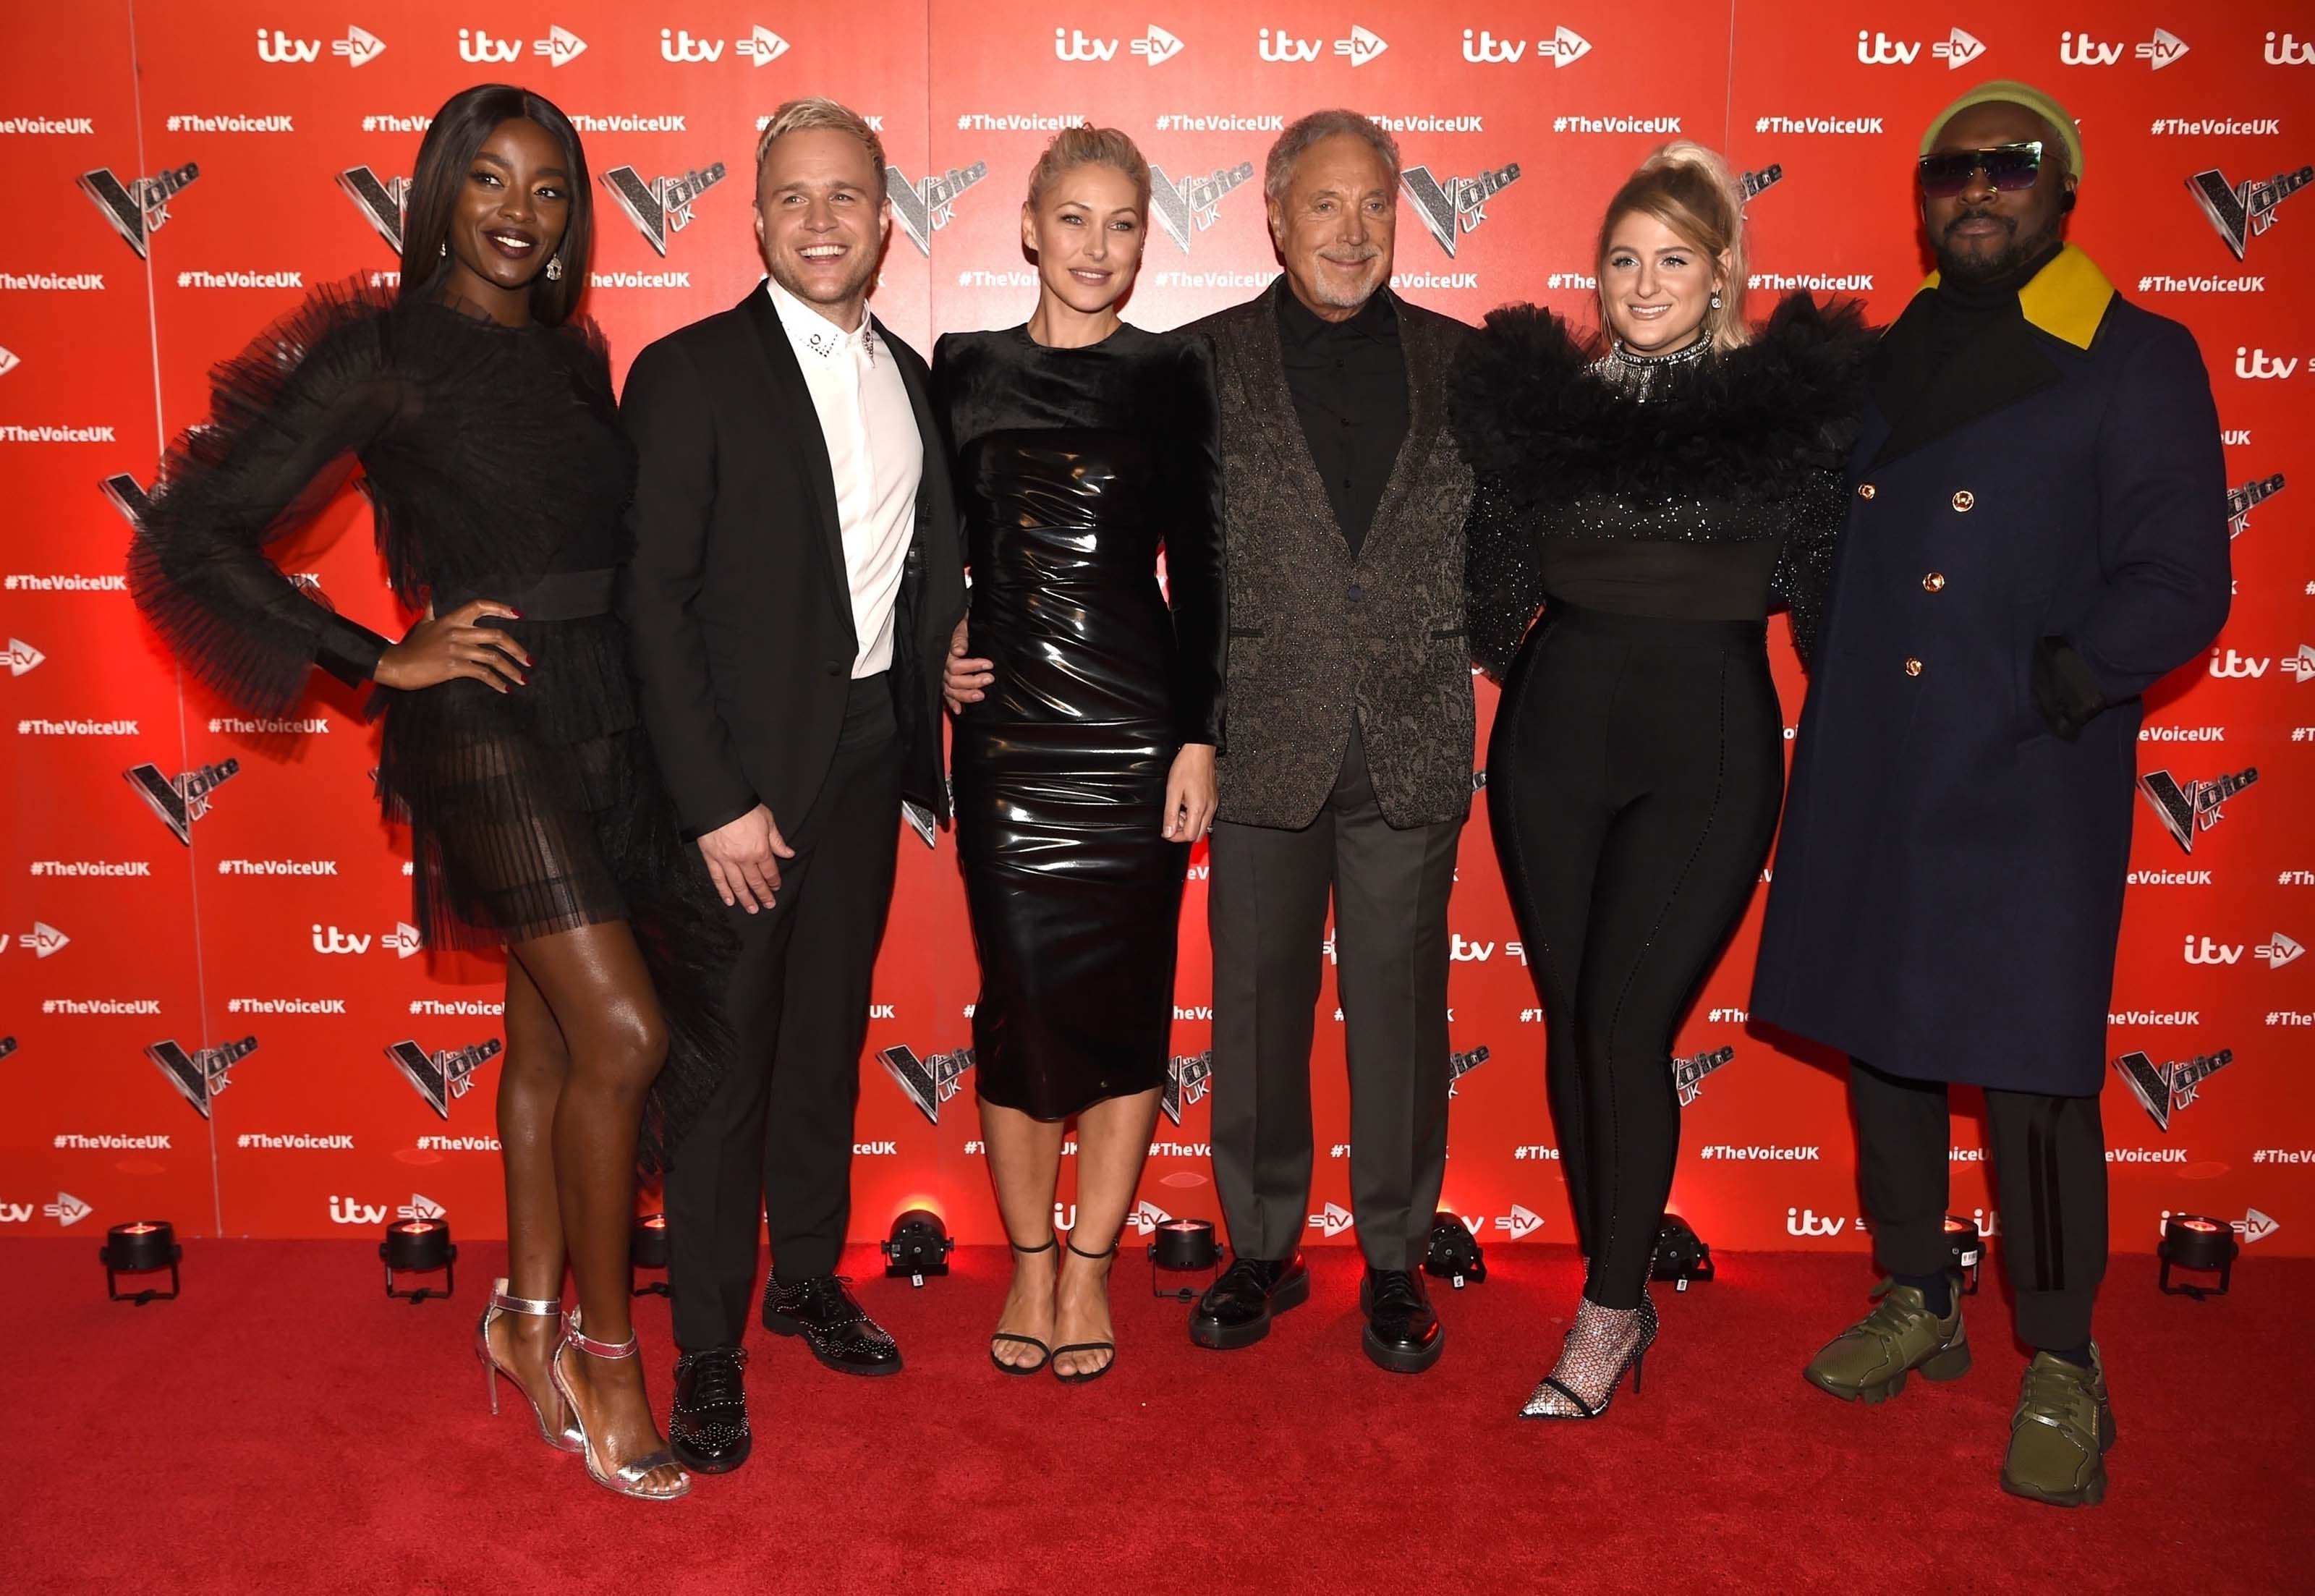 Emma Willis attends The Voice UK Blind Auditions